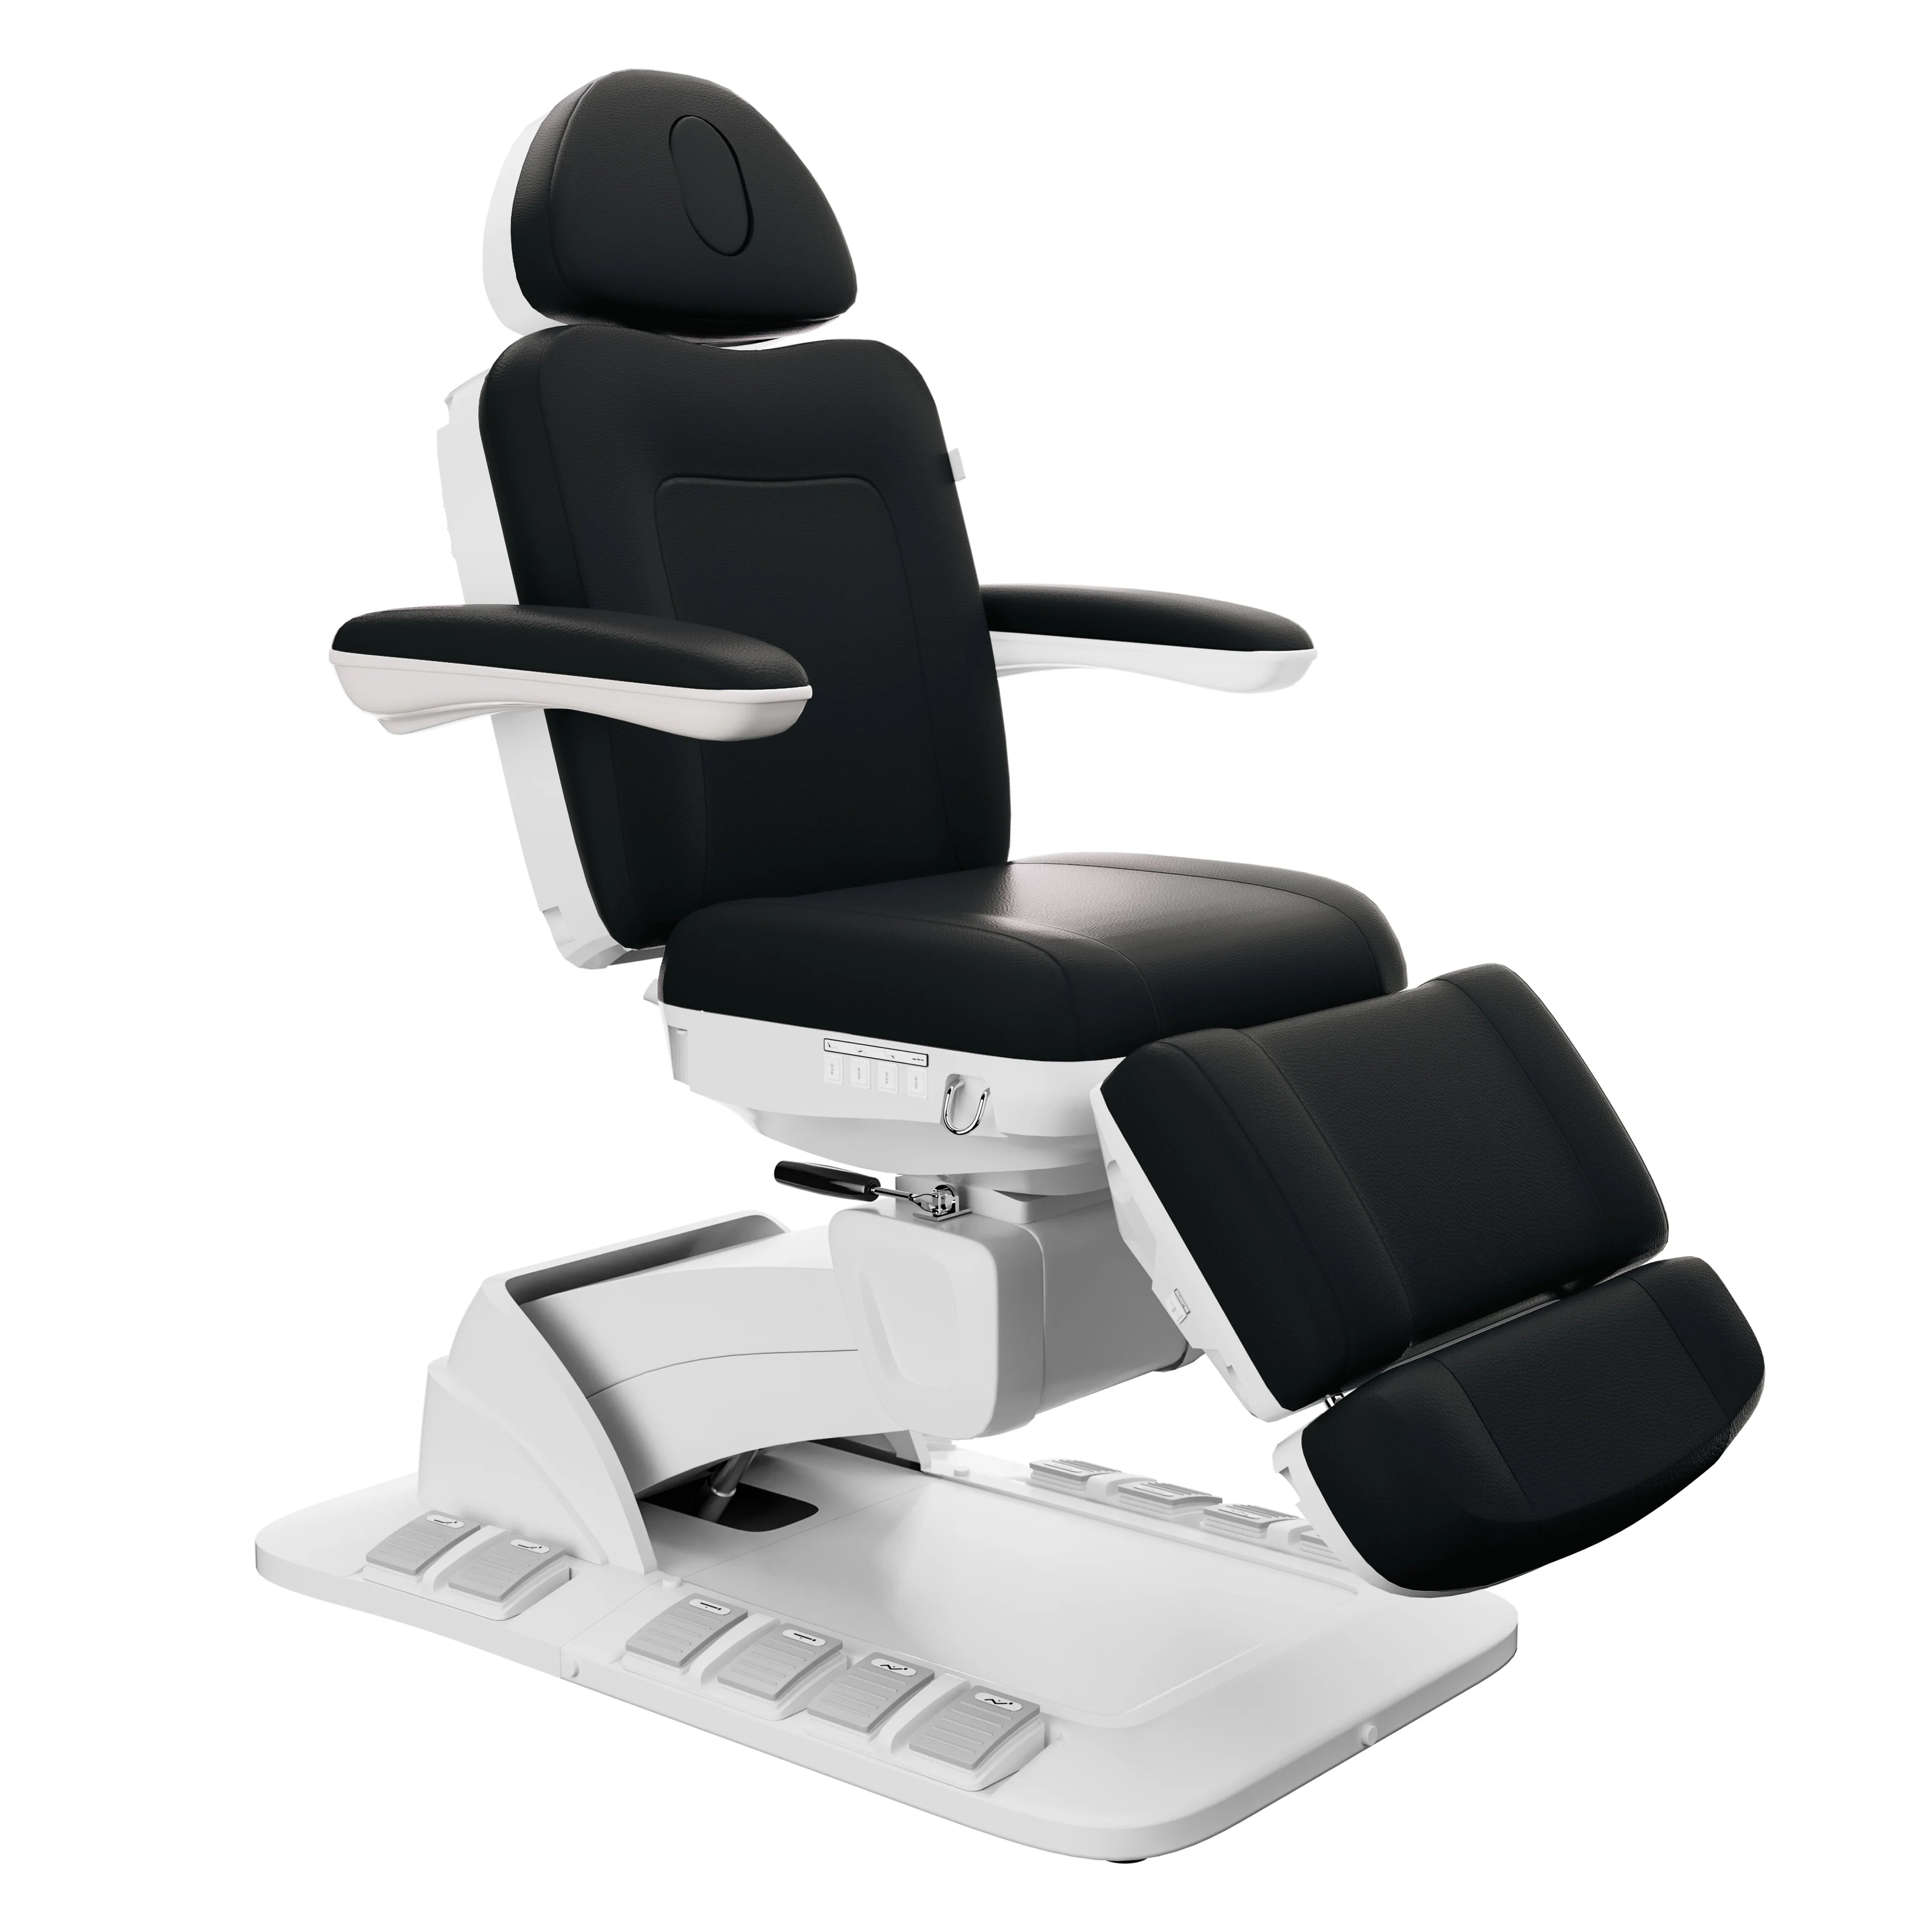 SpaMarc . Novato . Rotating . 4 Motor Spa Treatment Chair/Bed